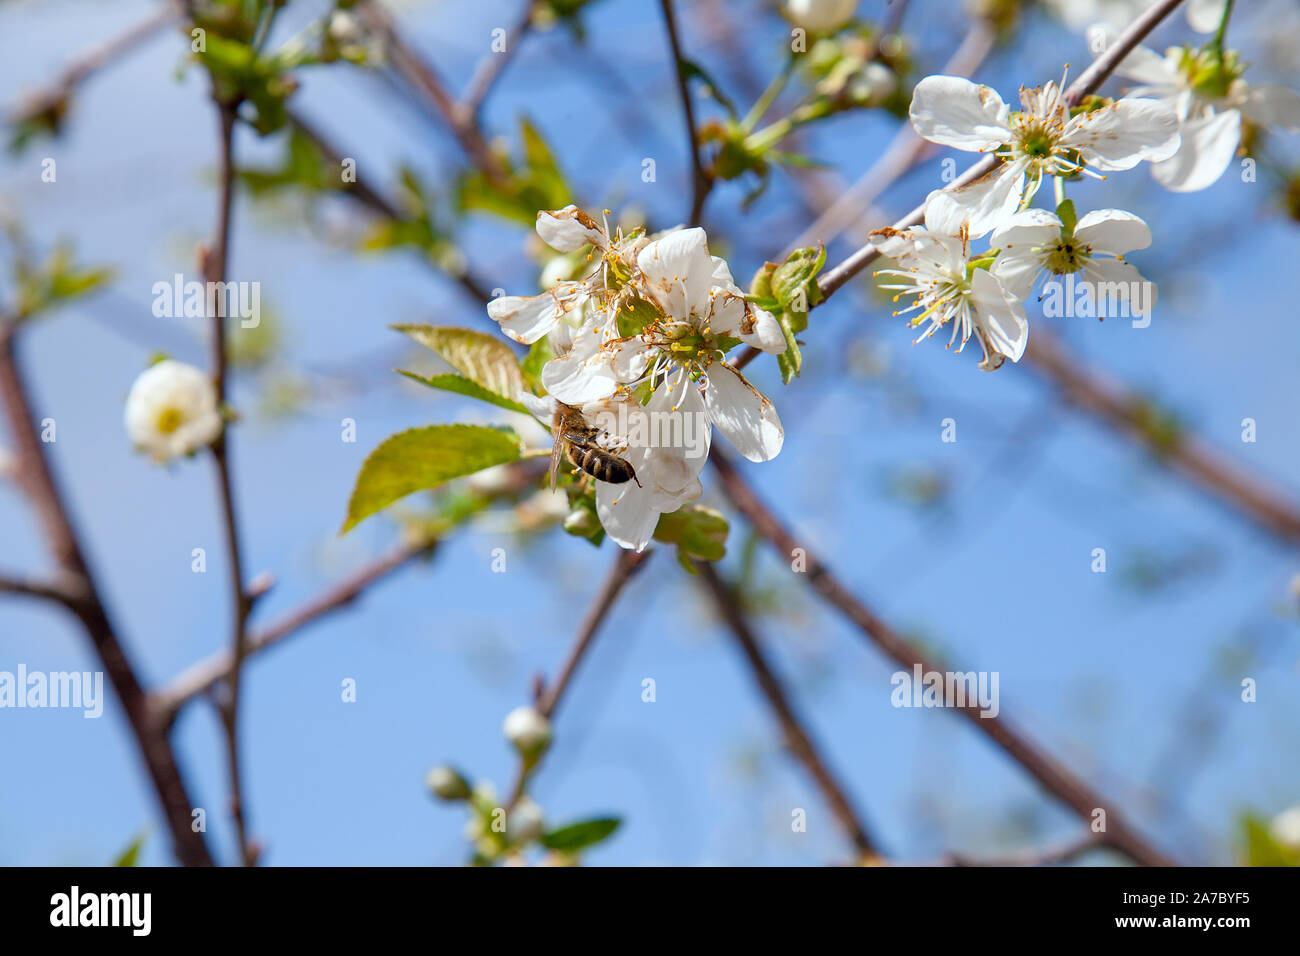 Orchard at spring time. Close up view of honeybee on white flower of cherry tree blossoms collecting pollen and nectar to make sweet honey. Small gree Stock Photo